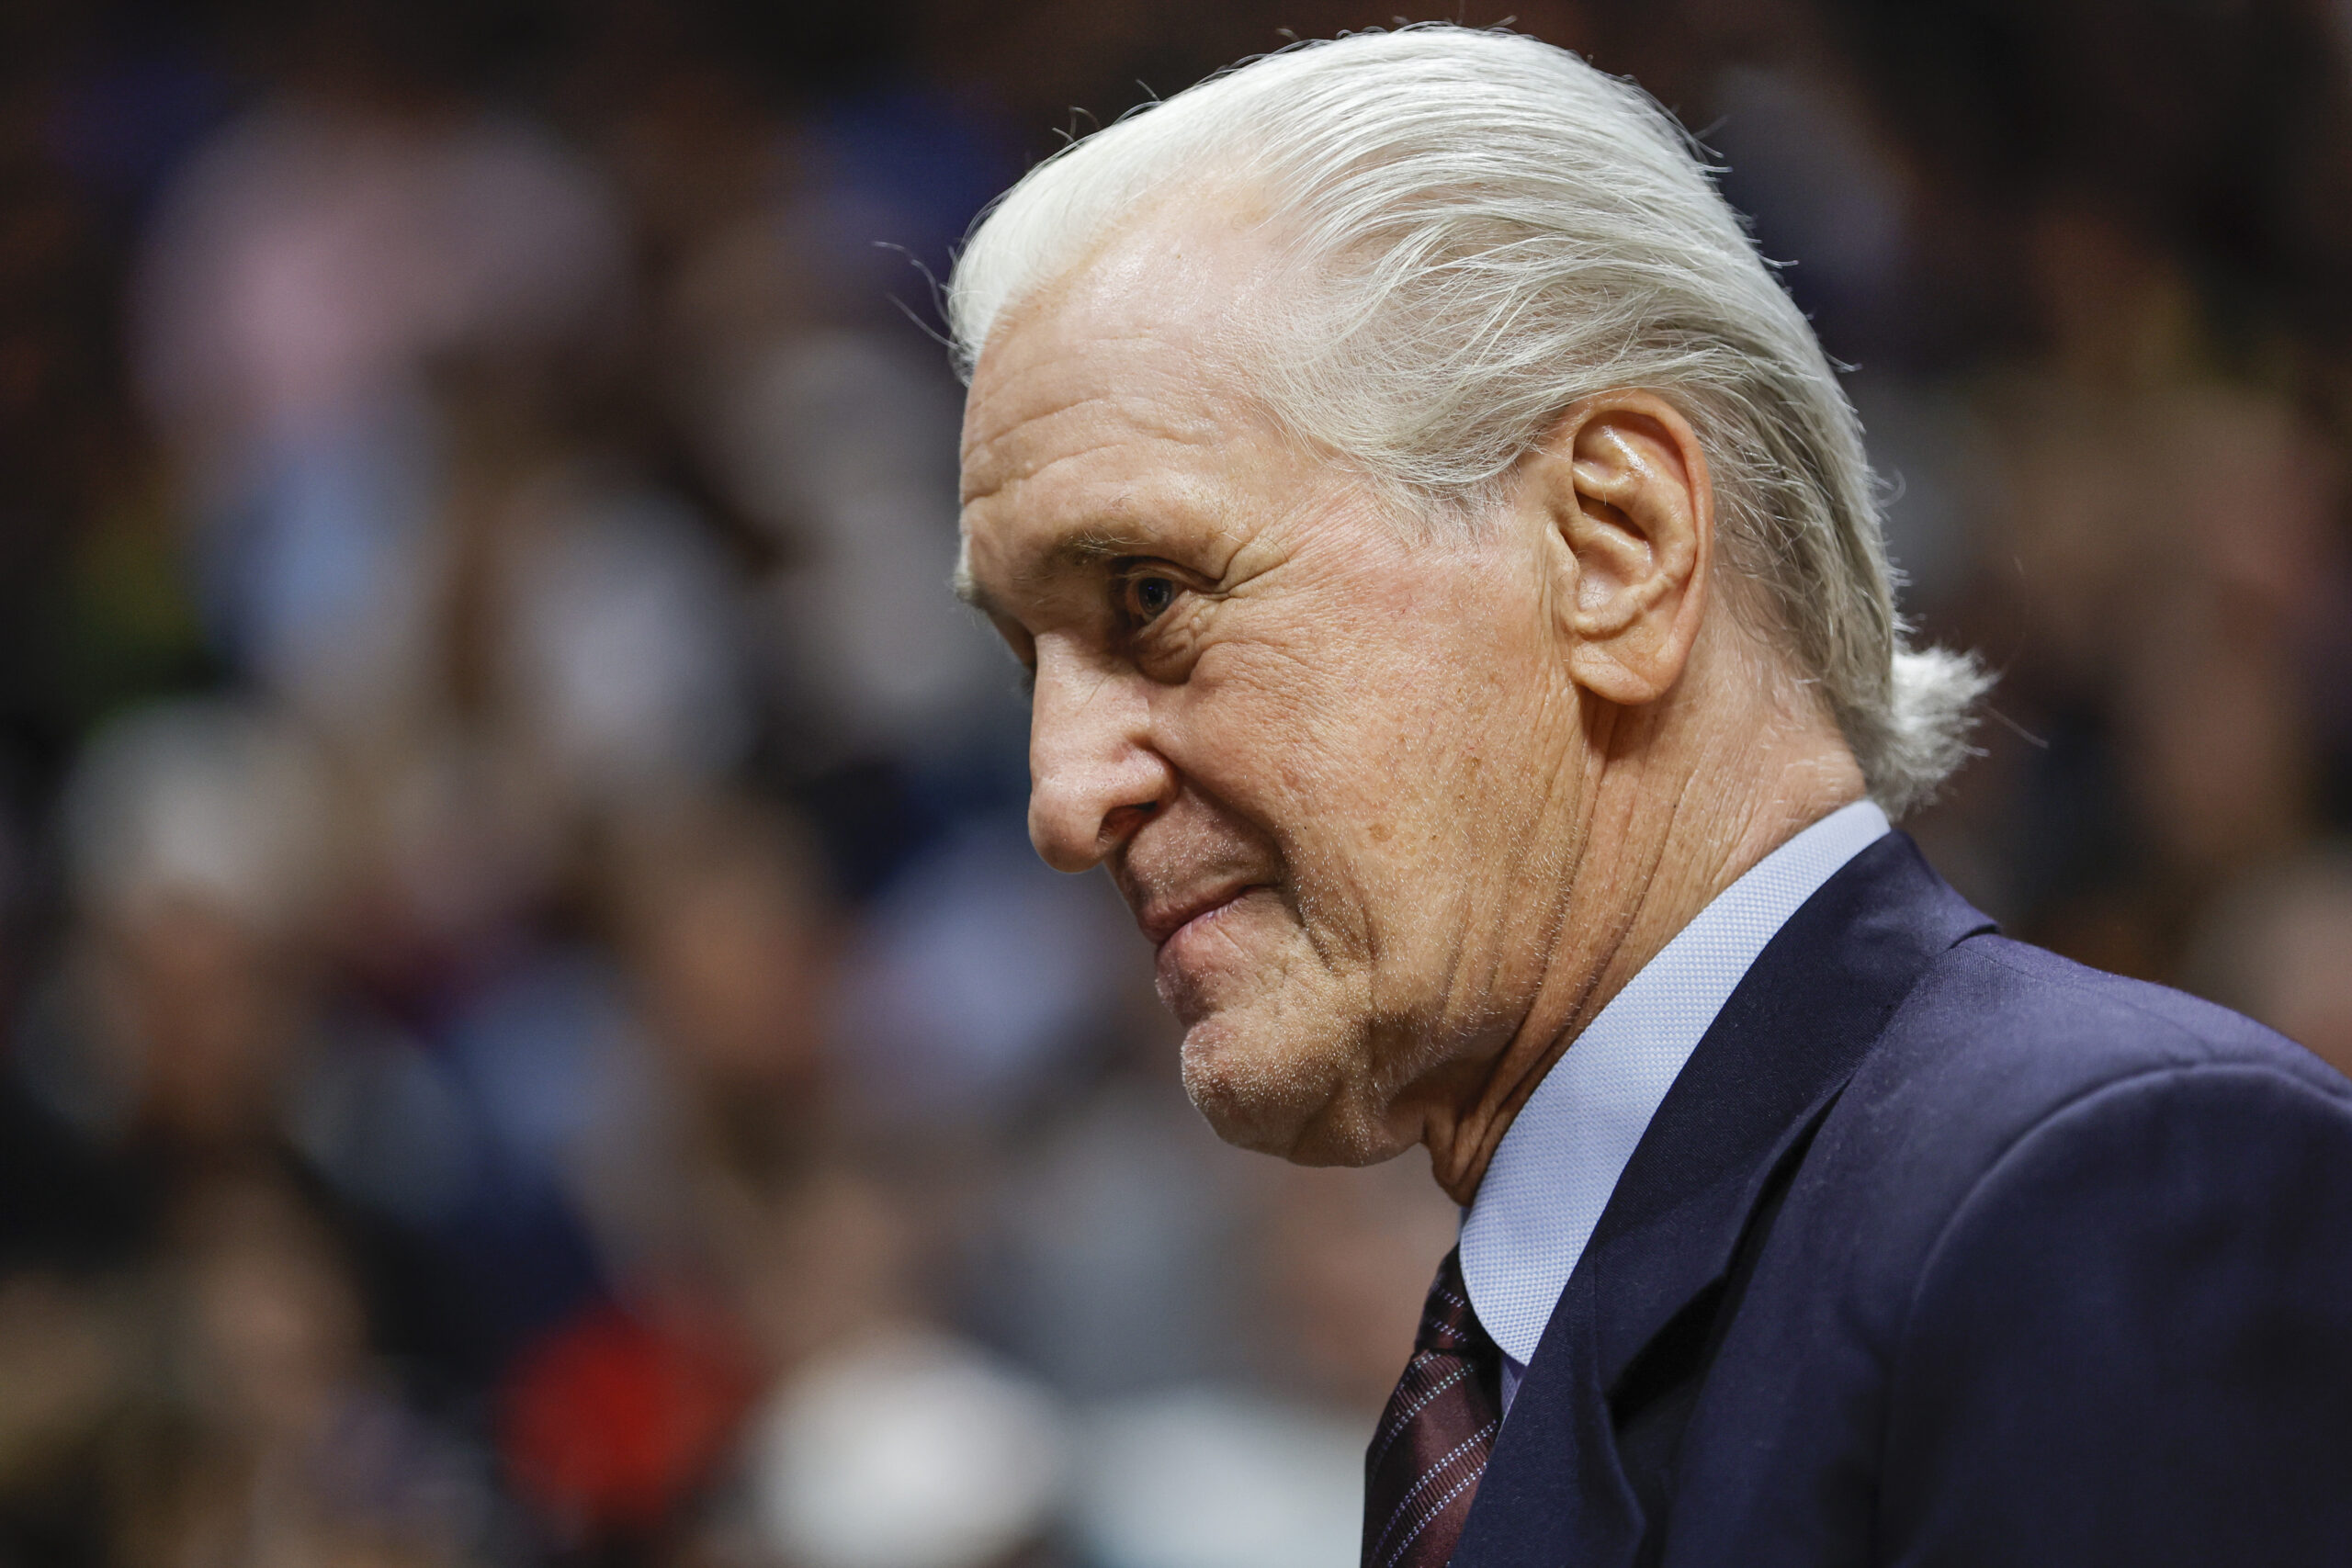 Dec 23, 2022; Miami, Florida, USA; Miami Heat team president Pat Riley looks on during the game between the Miami Heat and the Indiana Pacers at FTX Arena. Mandatory Credit: Sam Navarro-USA TODAY Sports